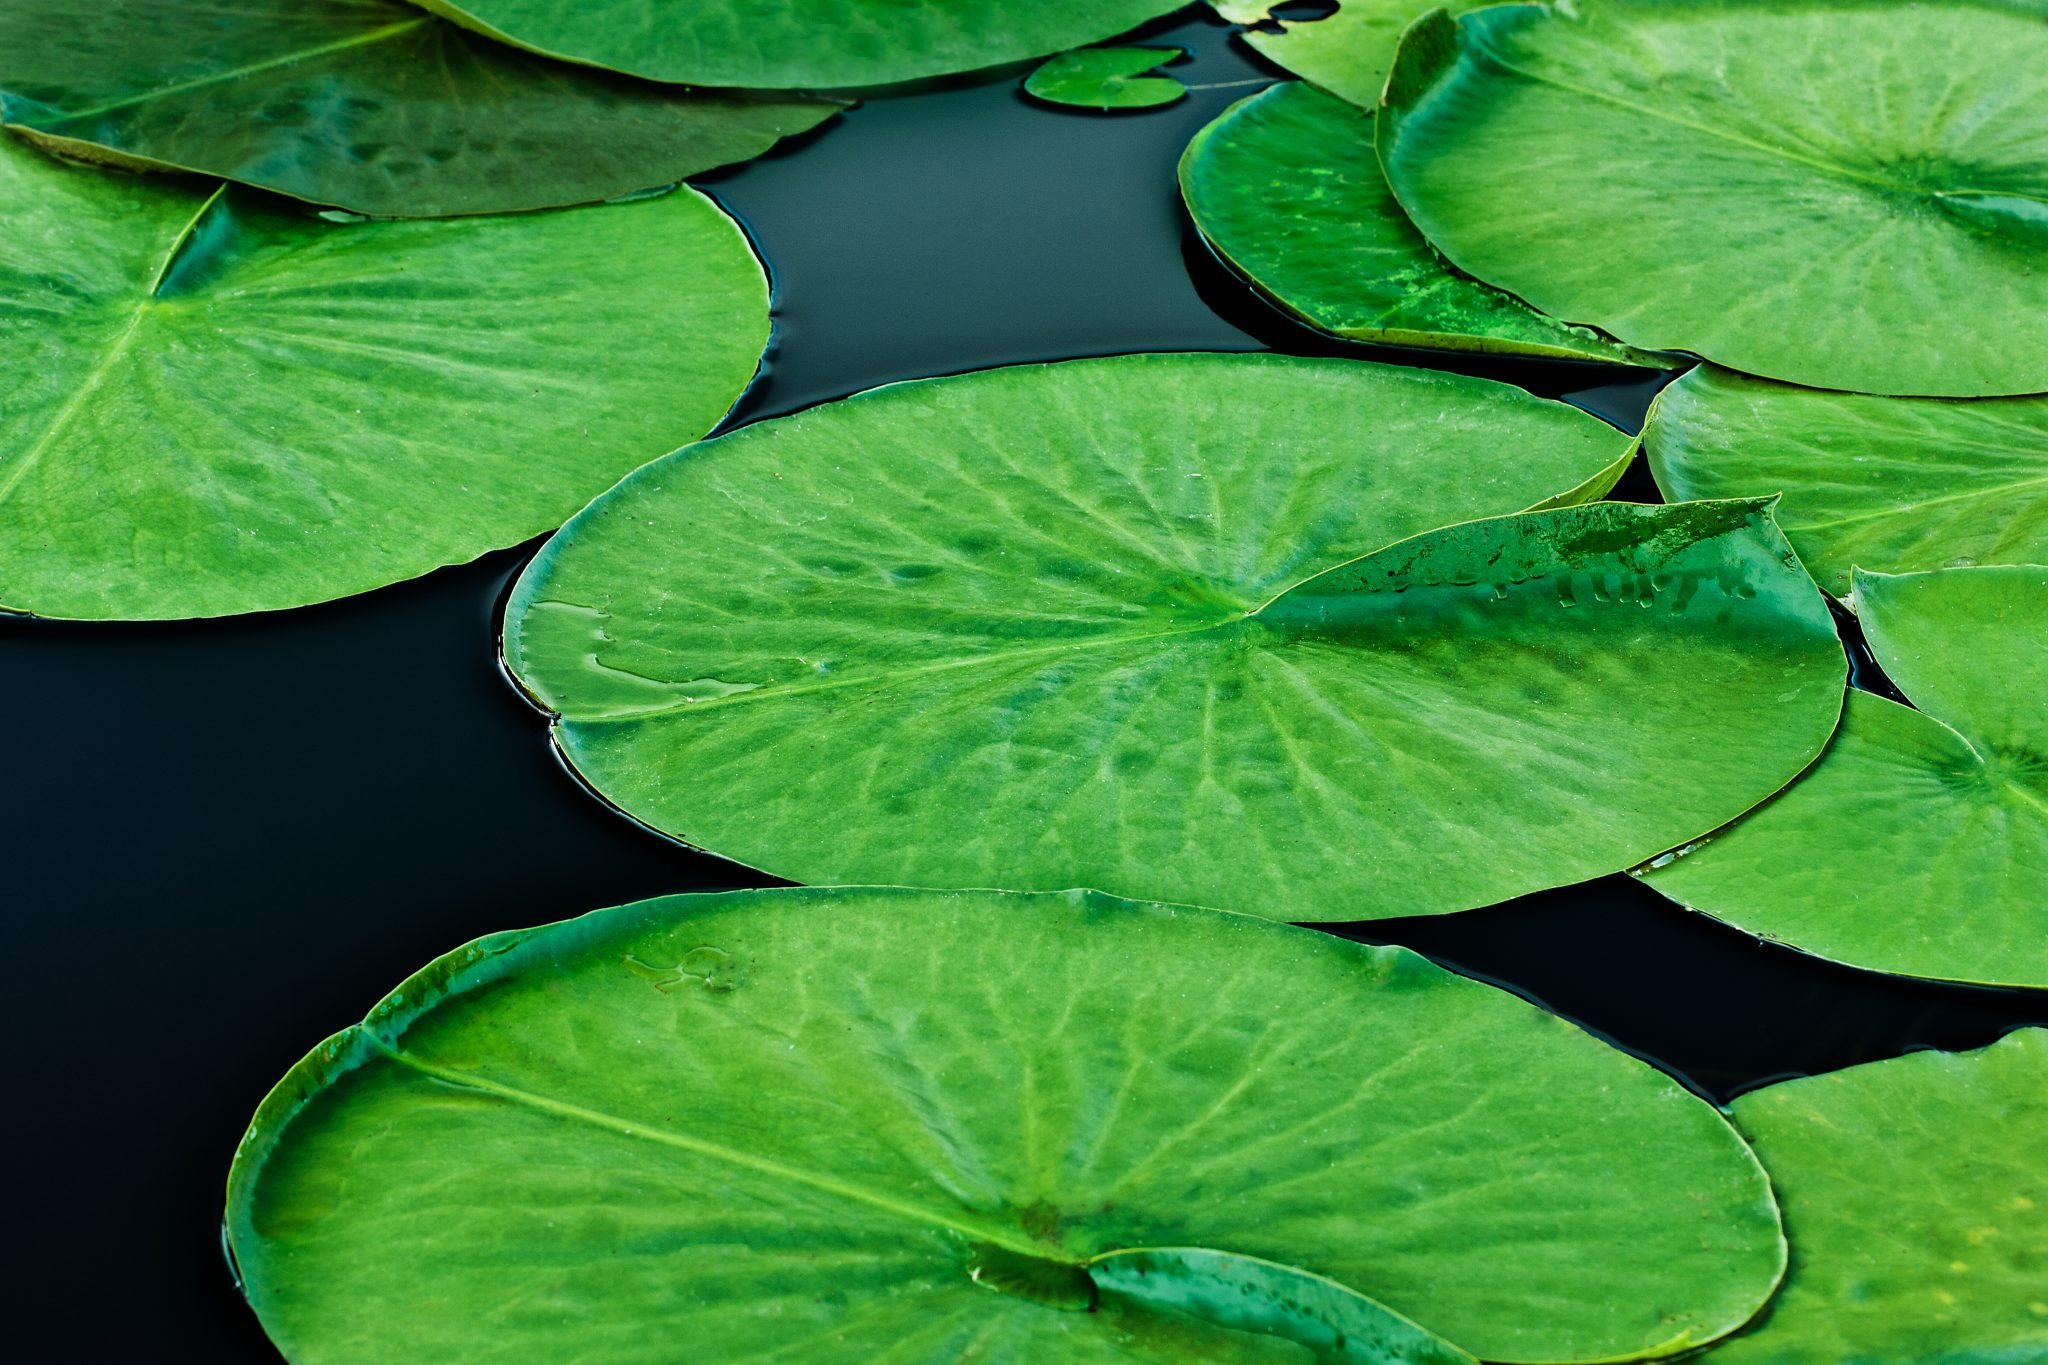 Lily Pads on a pond